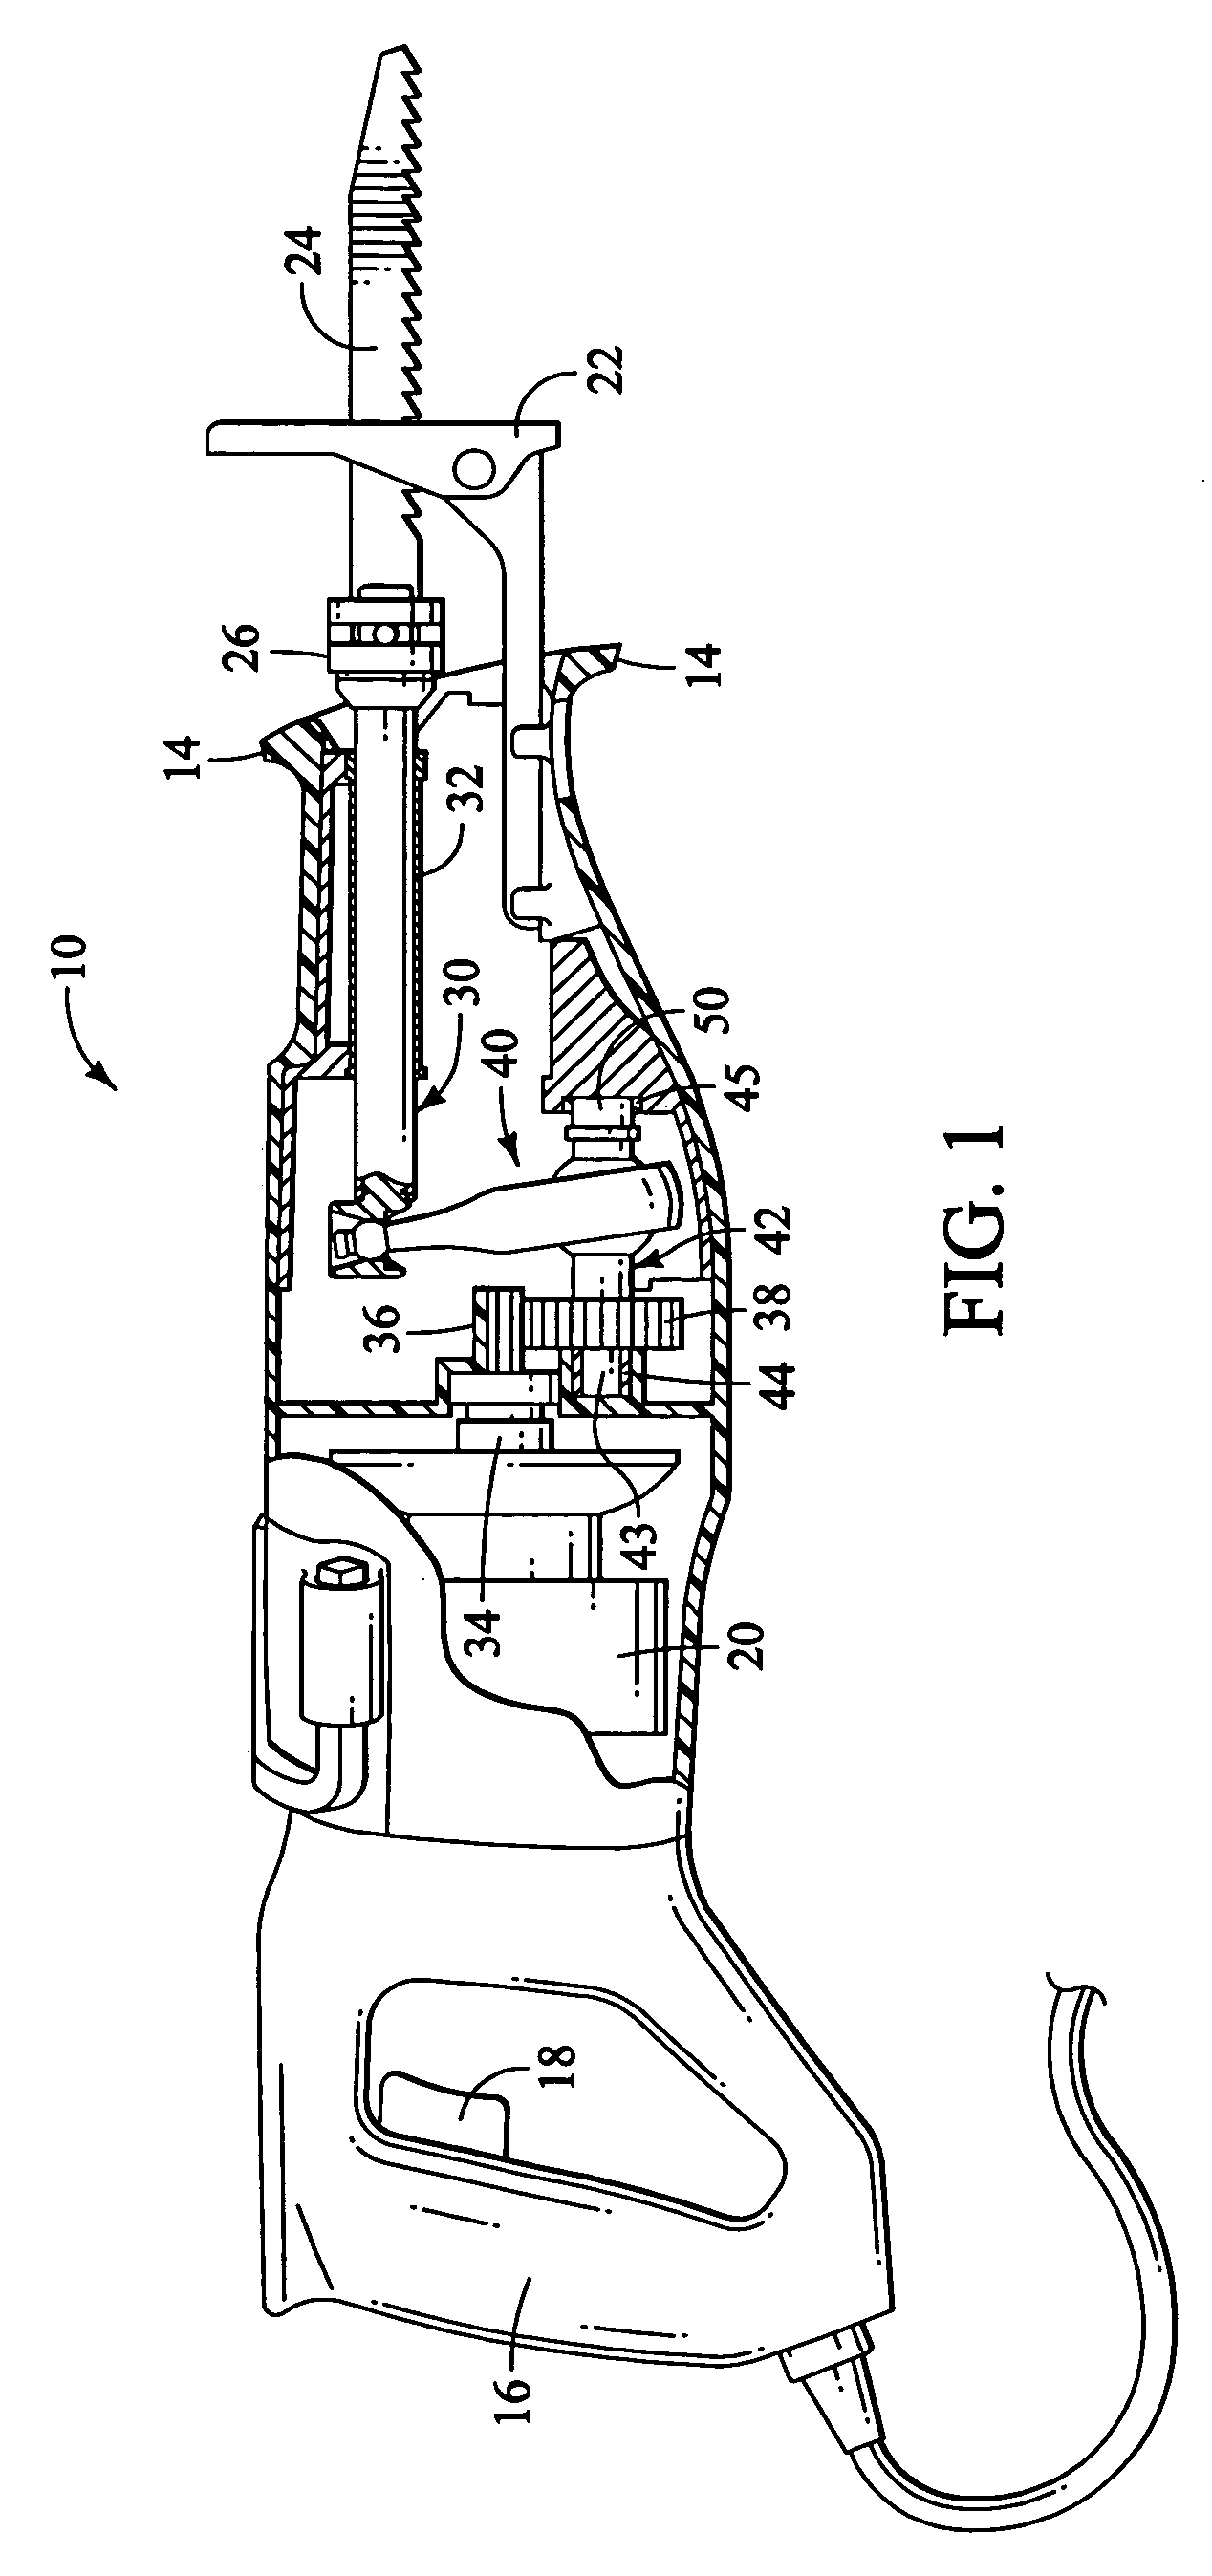 Anti-rotation drive mechanism for a reciprocating saw